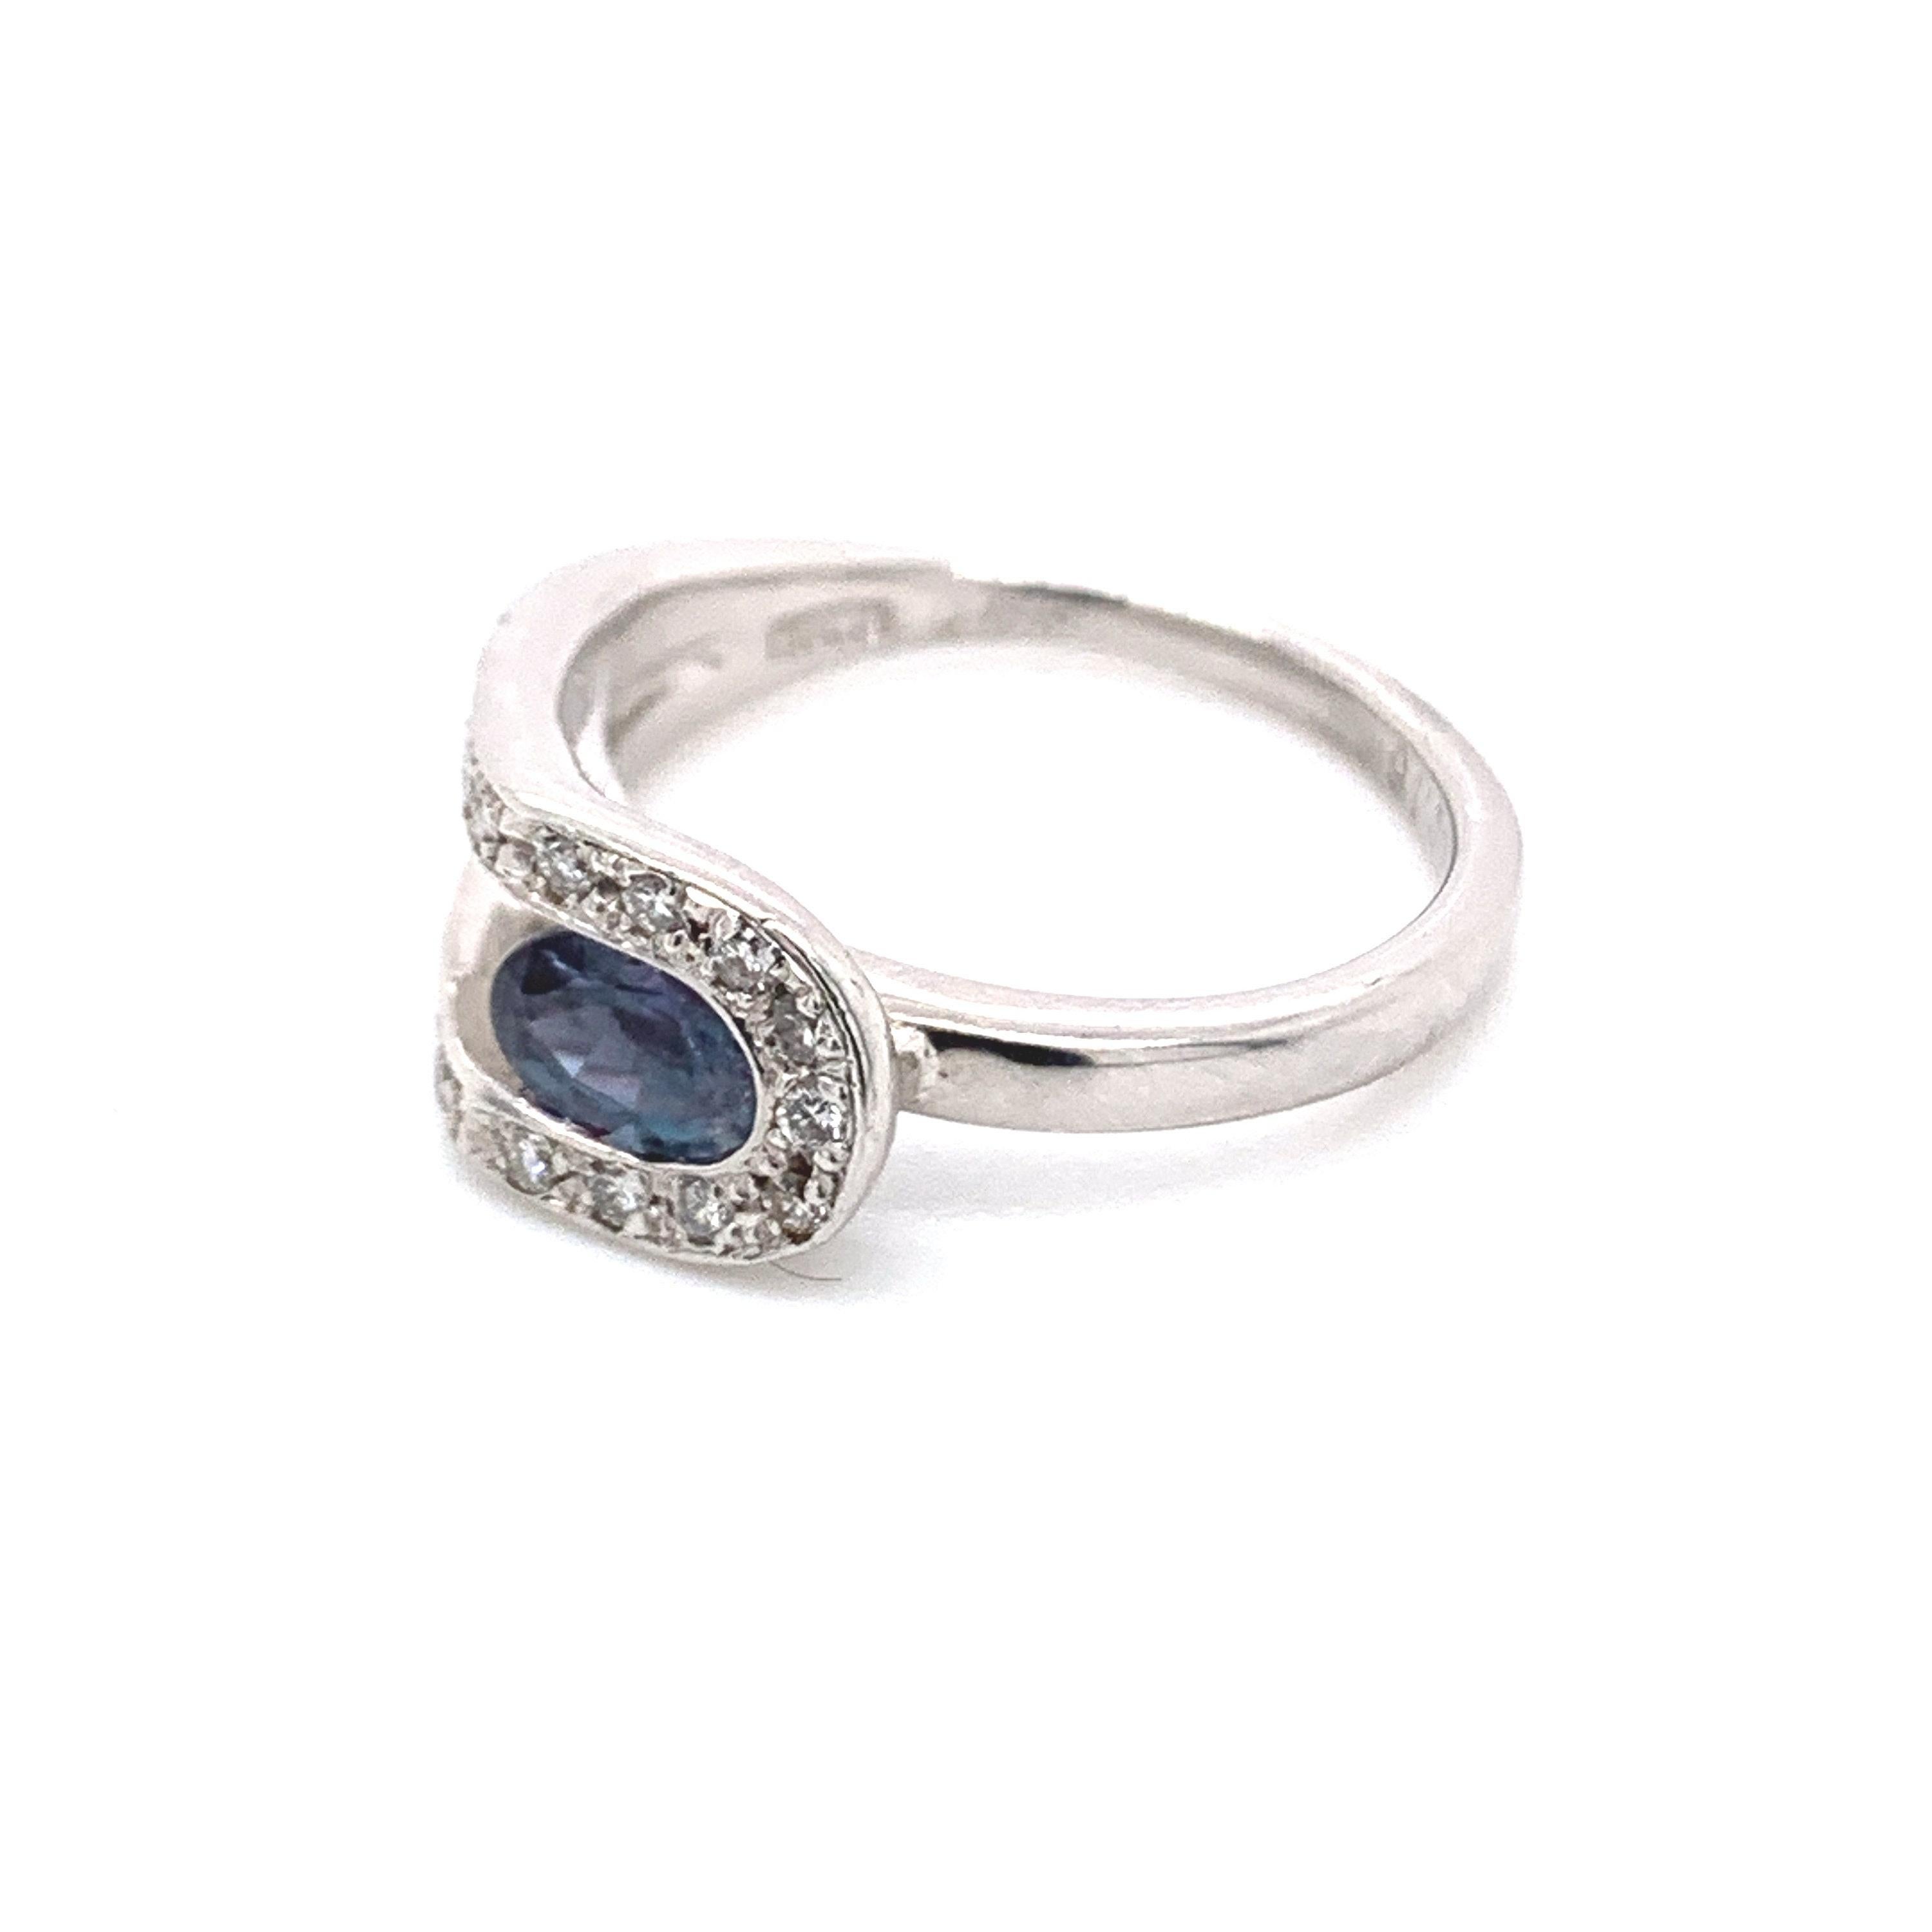 This is a gorgeous natural AAA quality oval Alexandrite surrounded by a dainty diamond halo that is set in a vintage platinum setting. This ring features a natural 0.55 oval alexandrite that is certified by the Gemological Institute of America (GIA)